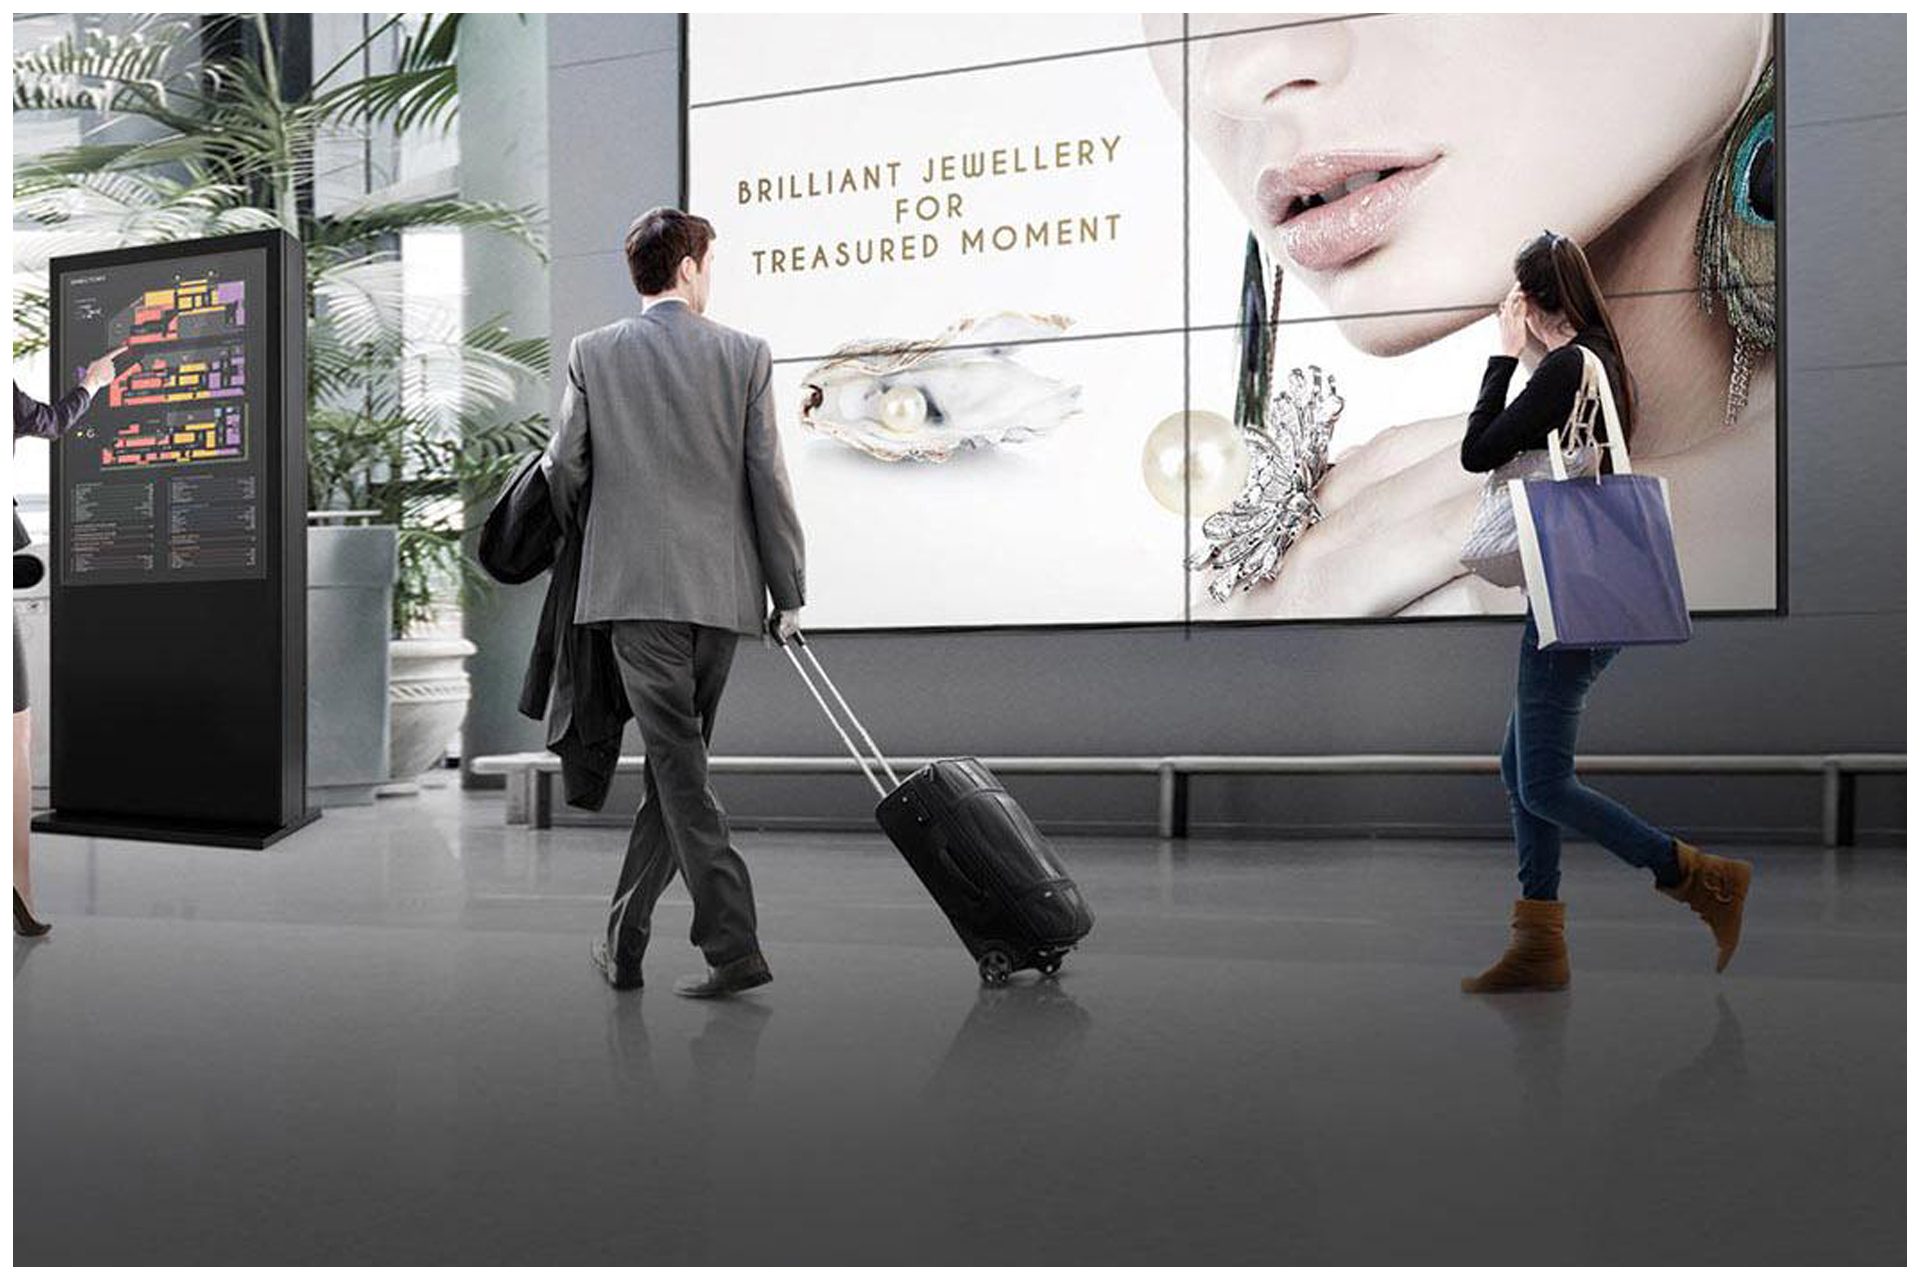 Impact of Airport Digital Signage on Sales and Brand Awareness